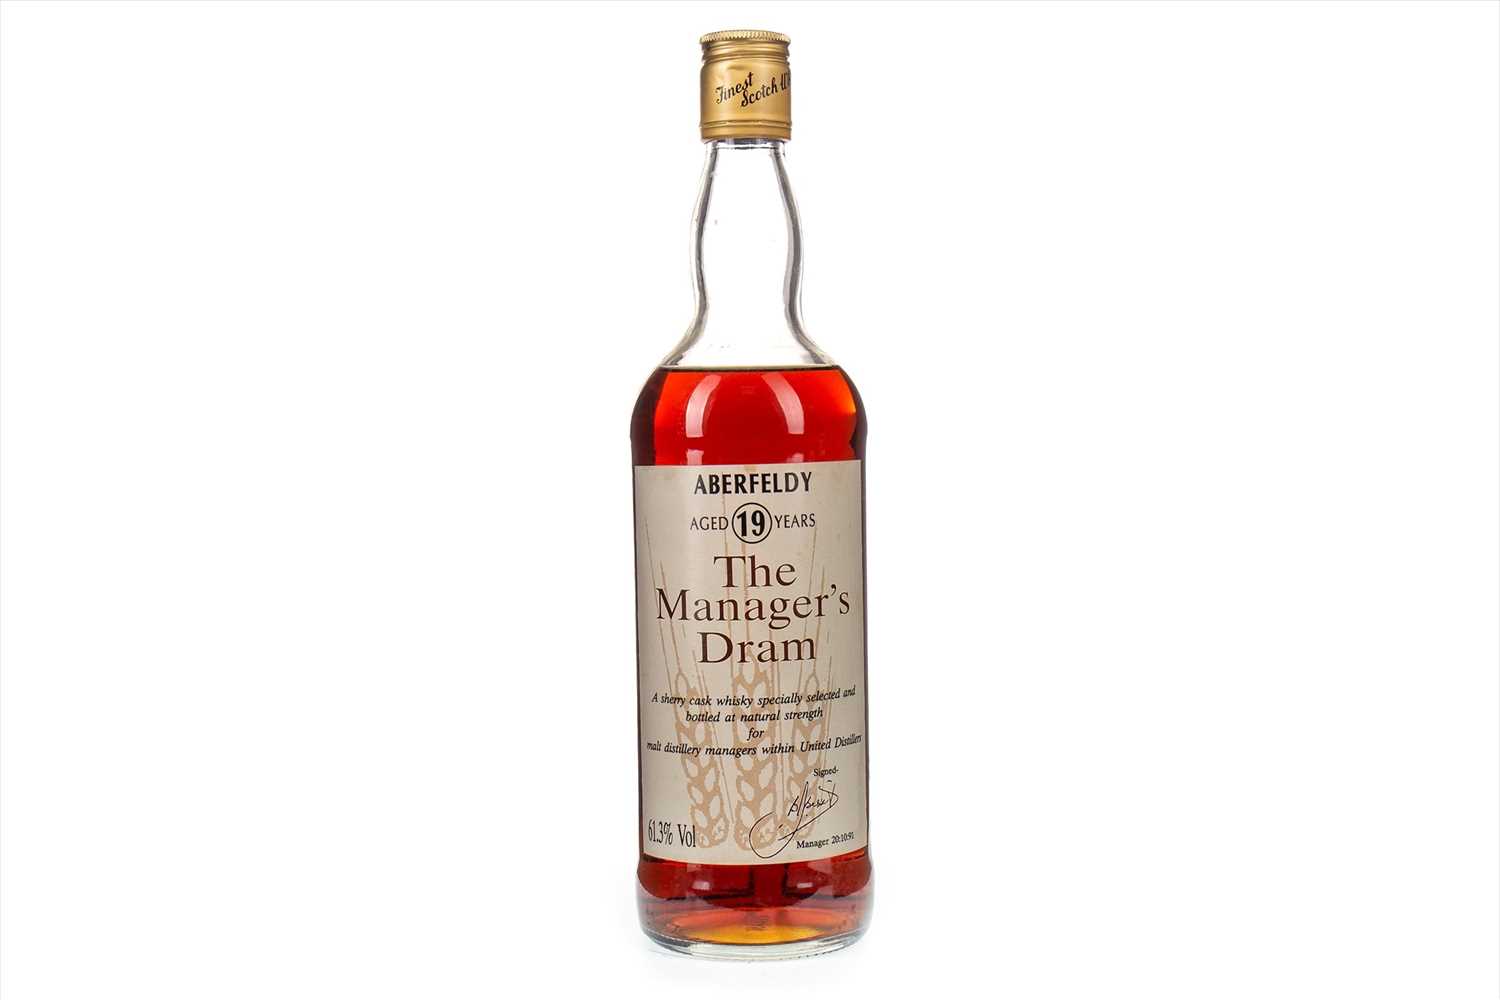 Lot 3 - ABERFELDY MANAGERS DRAM AGED 19 YEARS - LOW FILL